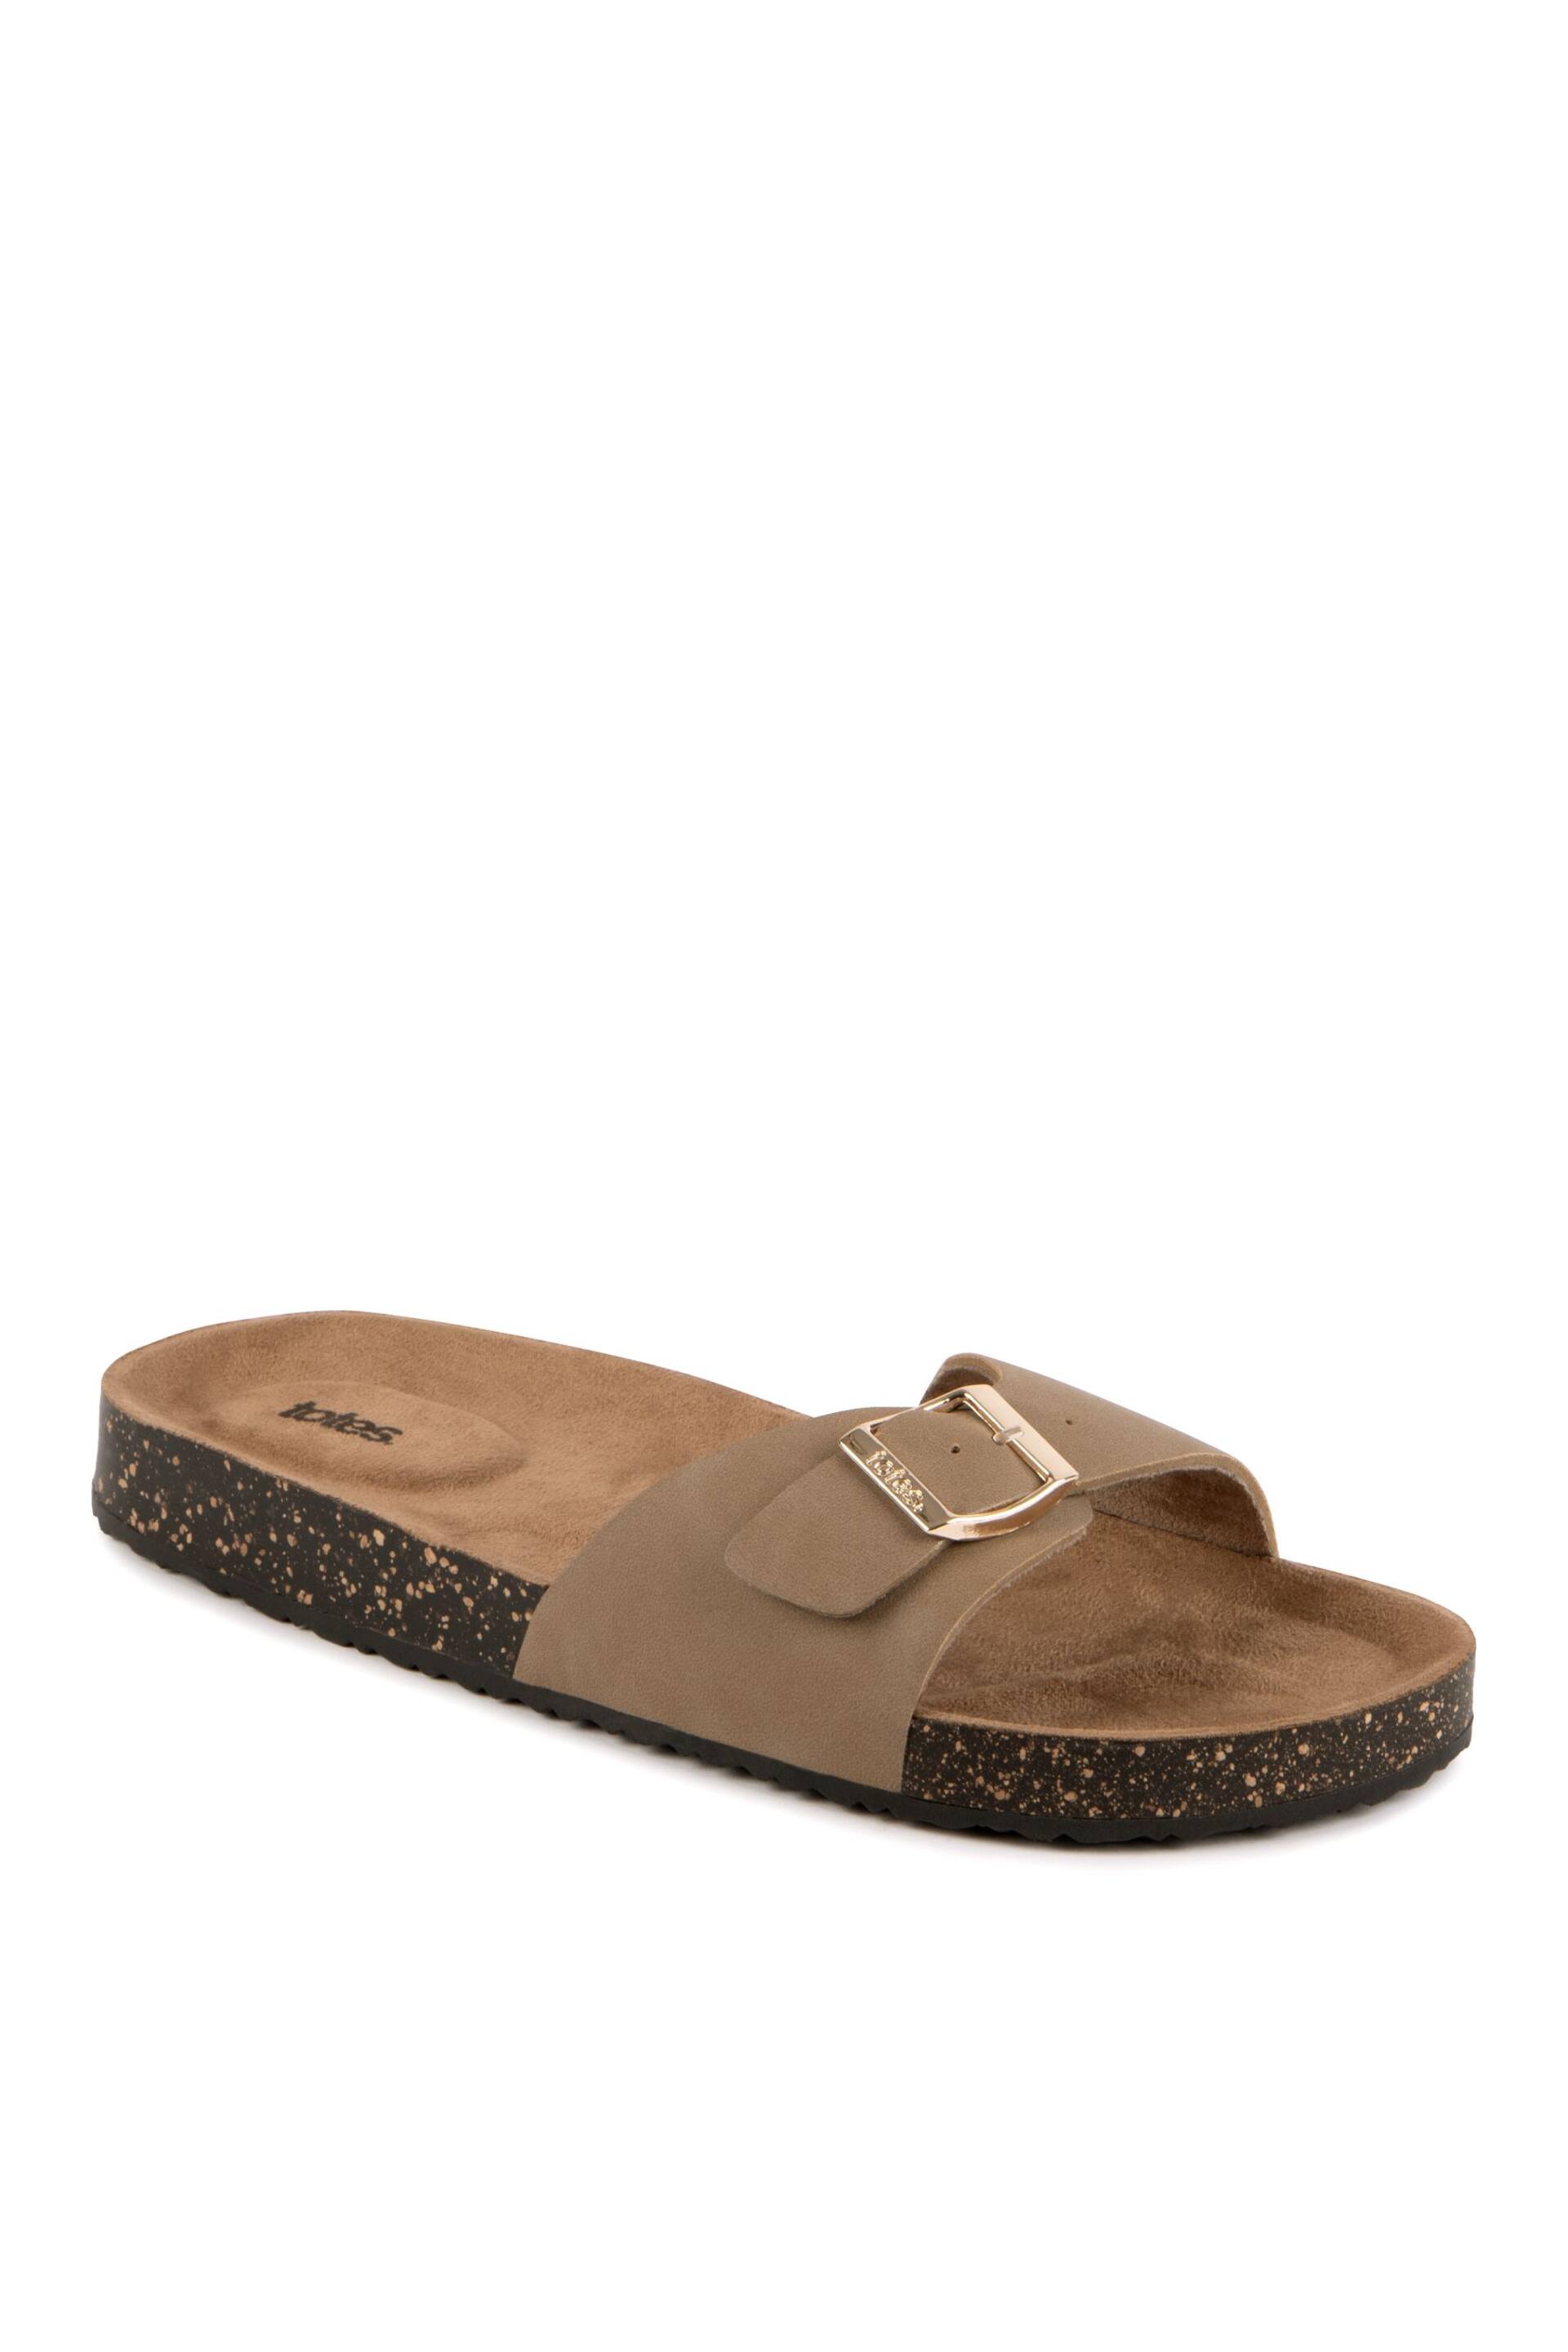 Totes Taupe Ladies Buckle Sandals - Image 3 of 5